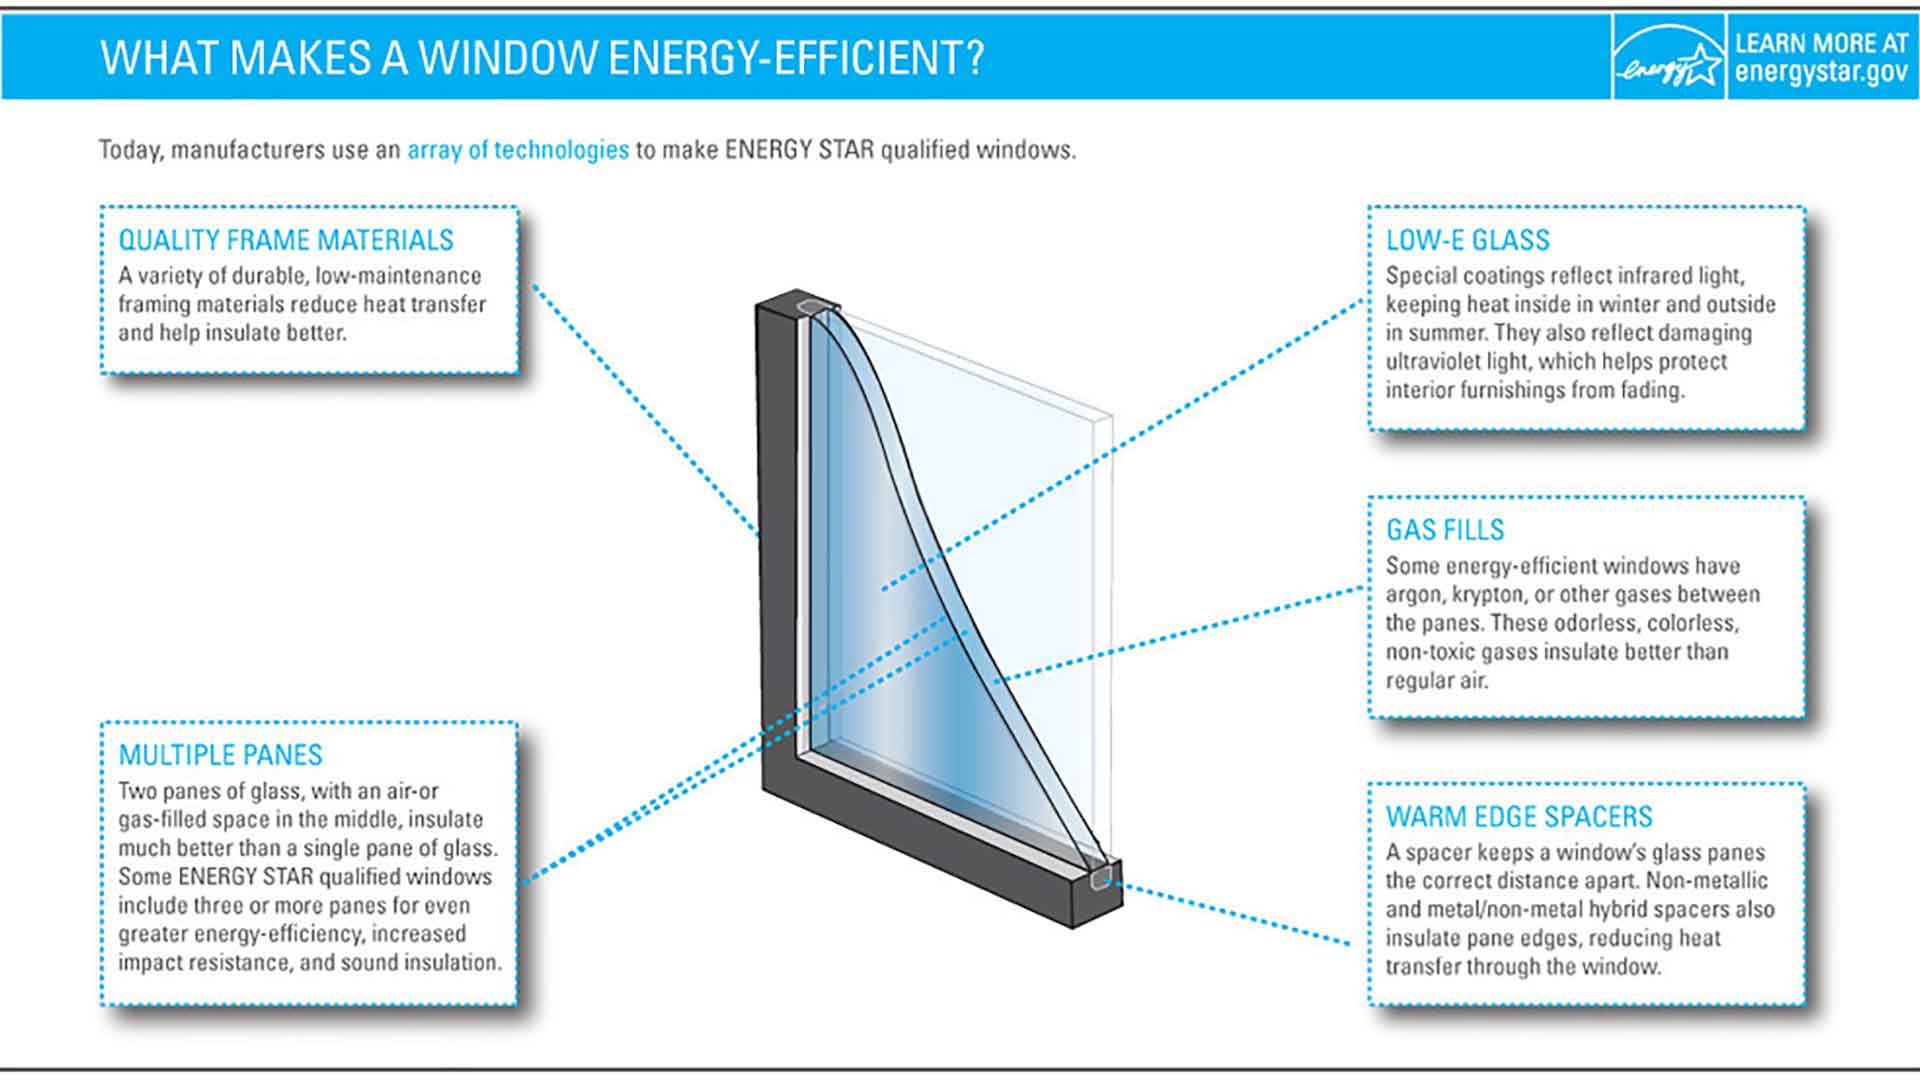 The Guide to Blending Energy Savings and Style with Replacement Windows